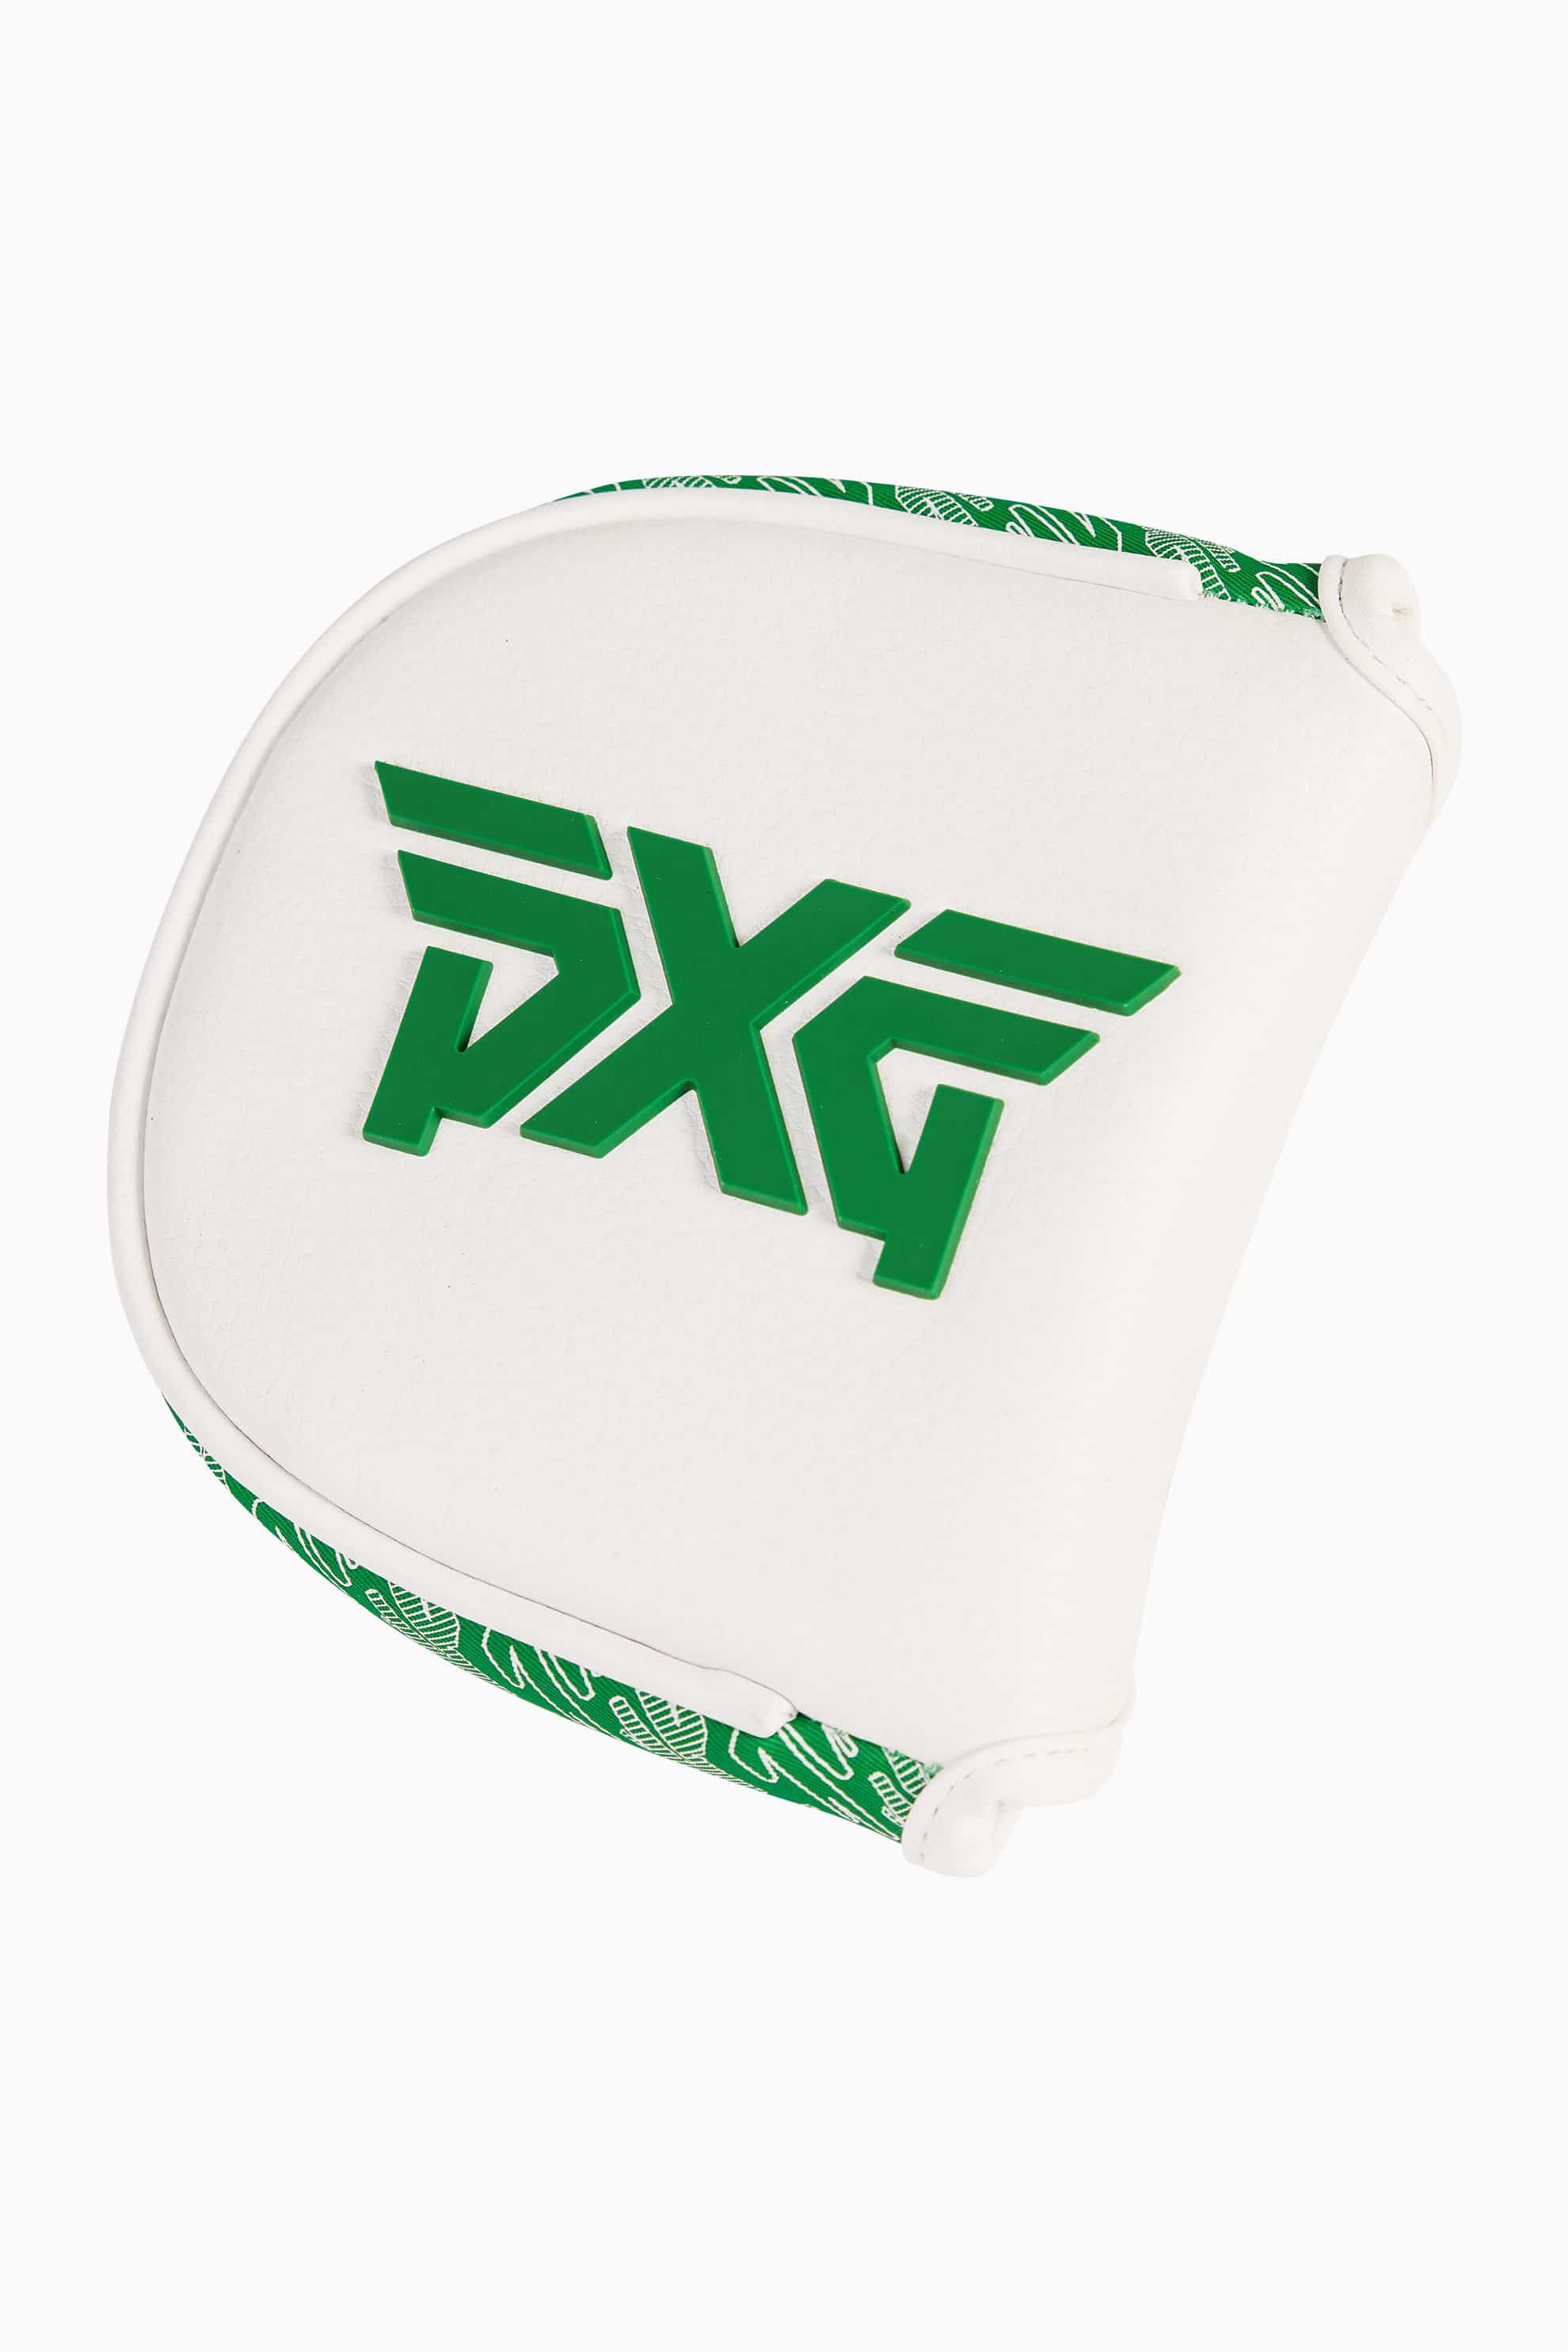 Shop PXG Headcovers for Driver, Woods, and Putter | PXG